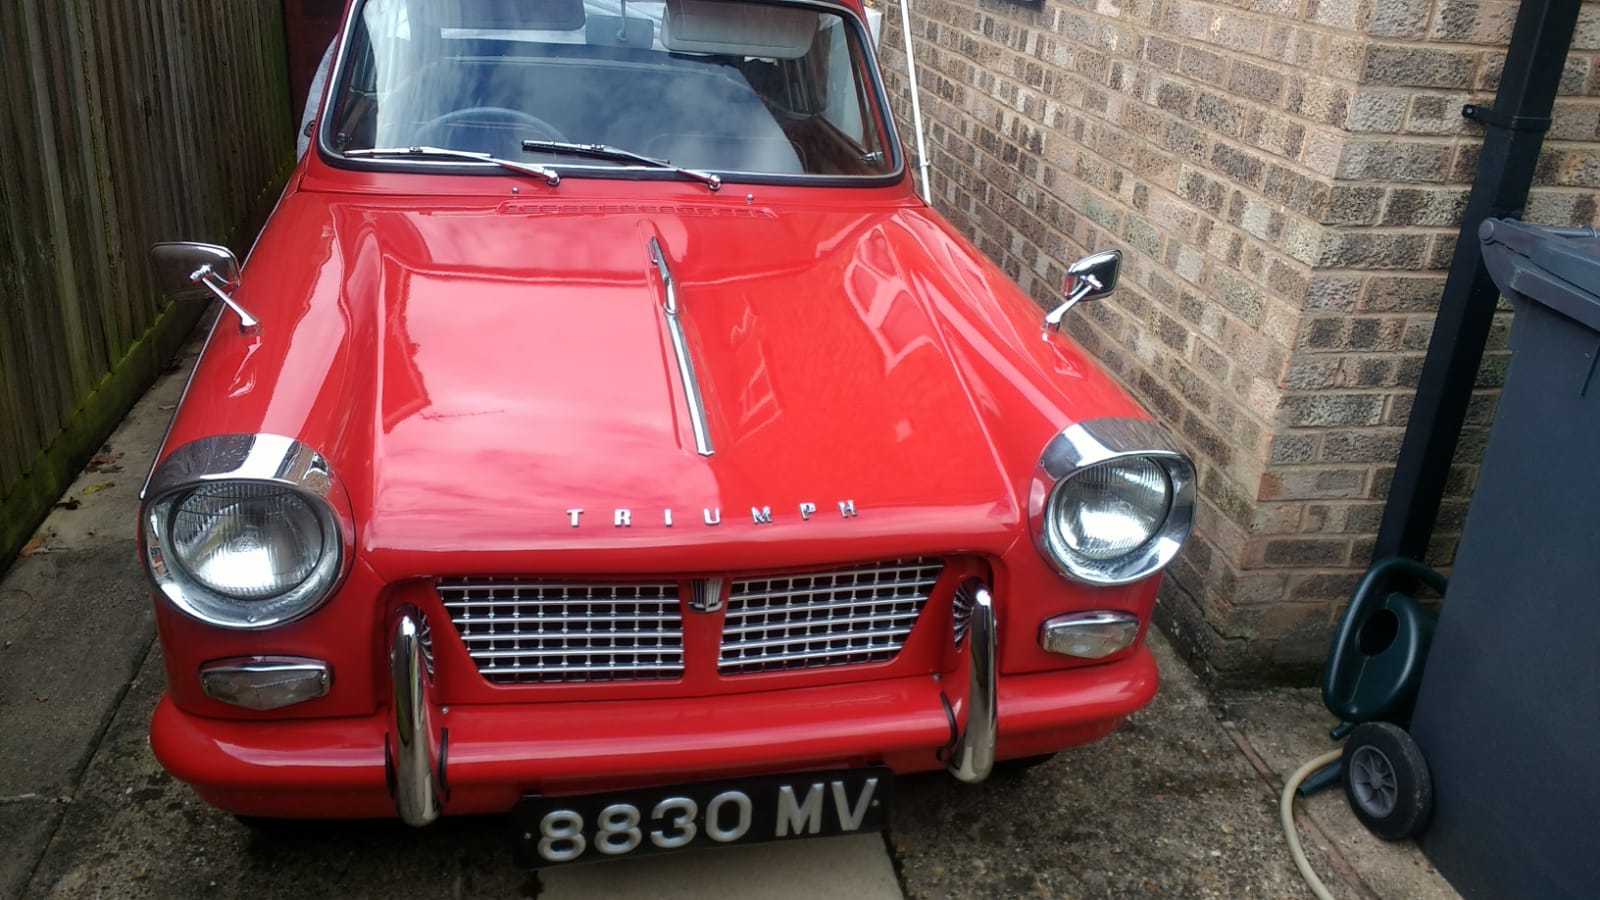 1960 Triumph Herald Convertible Restoration - Page 1 - Readers' Cars - PistonHeads